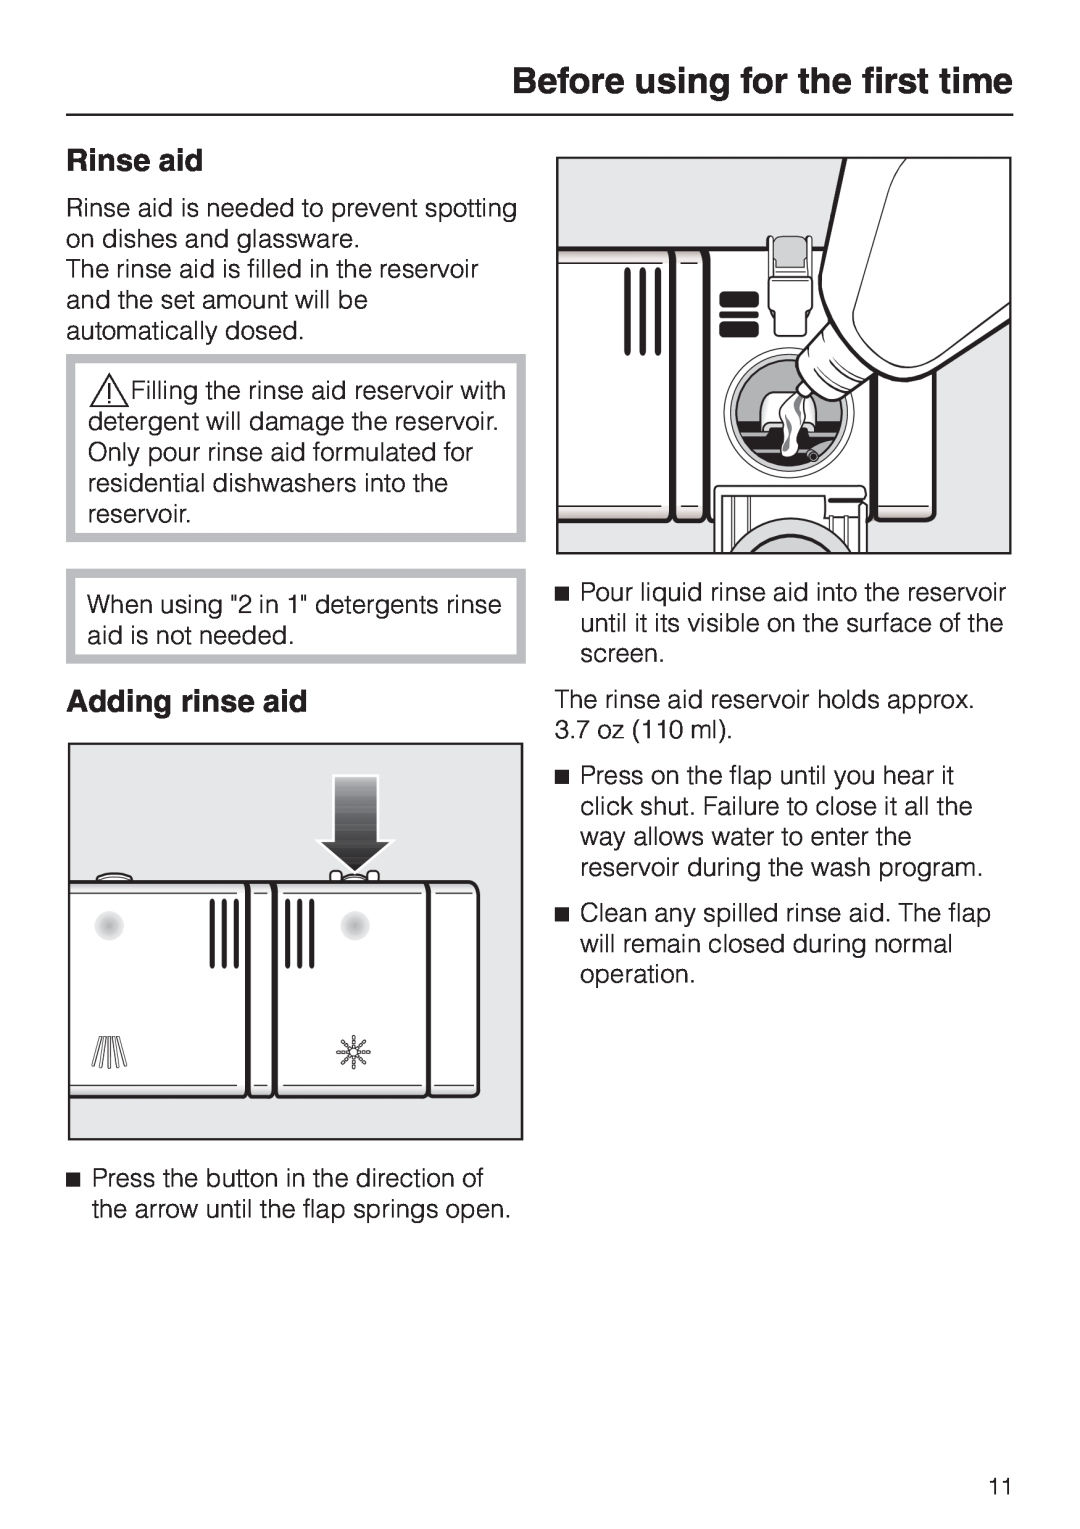 Miele G 2150, G 1150 operating instructions Rinse aid, Adding rinse aid, Before using for the first time 